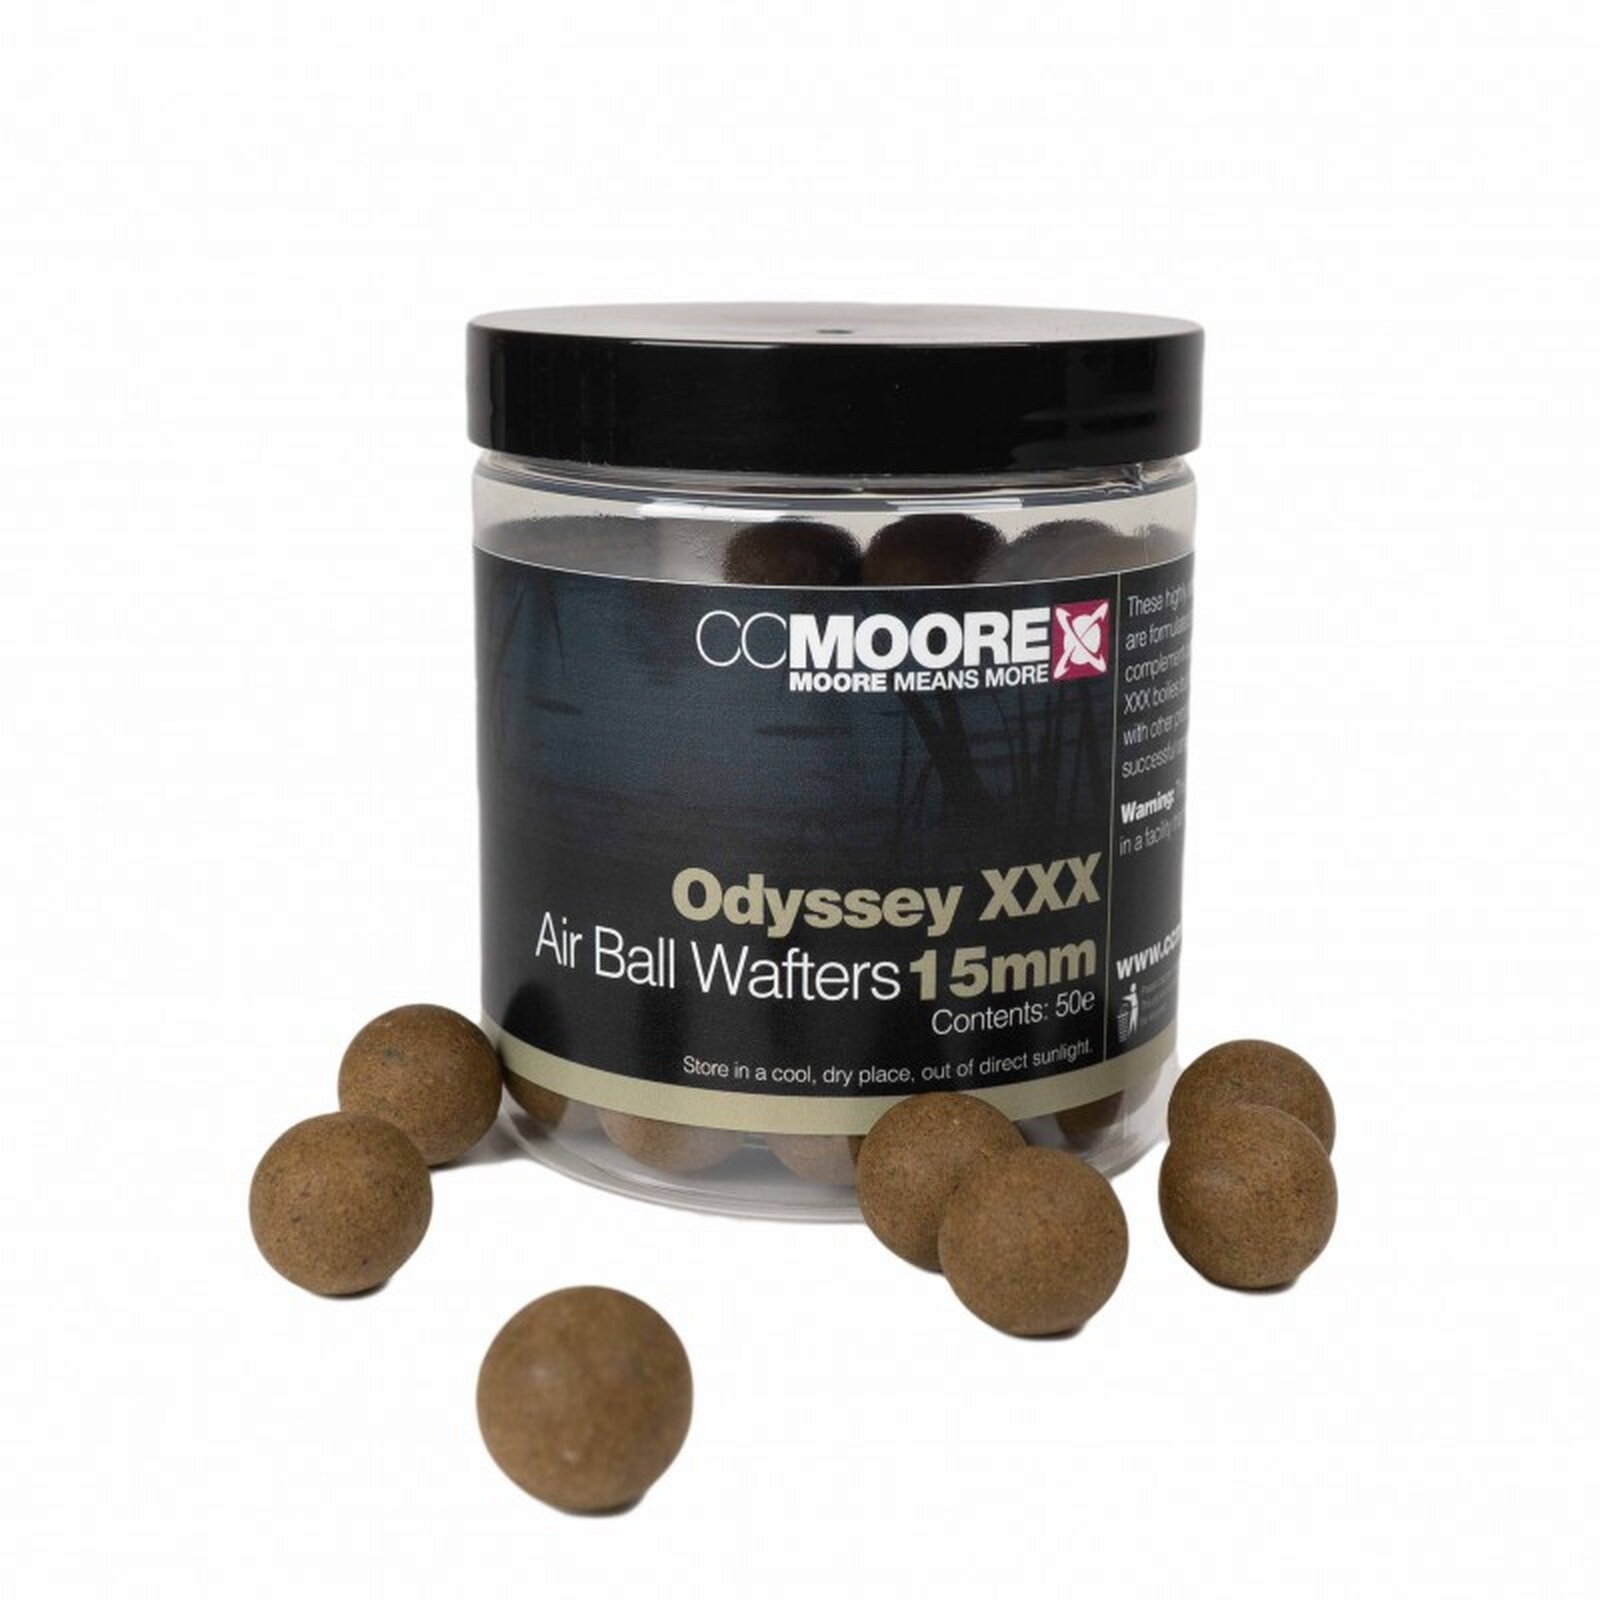 CC MOORE Odyssey XXX Air Ball Wafters 12mm